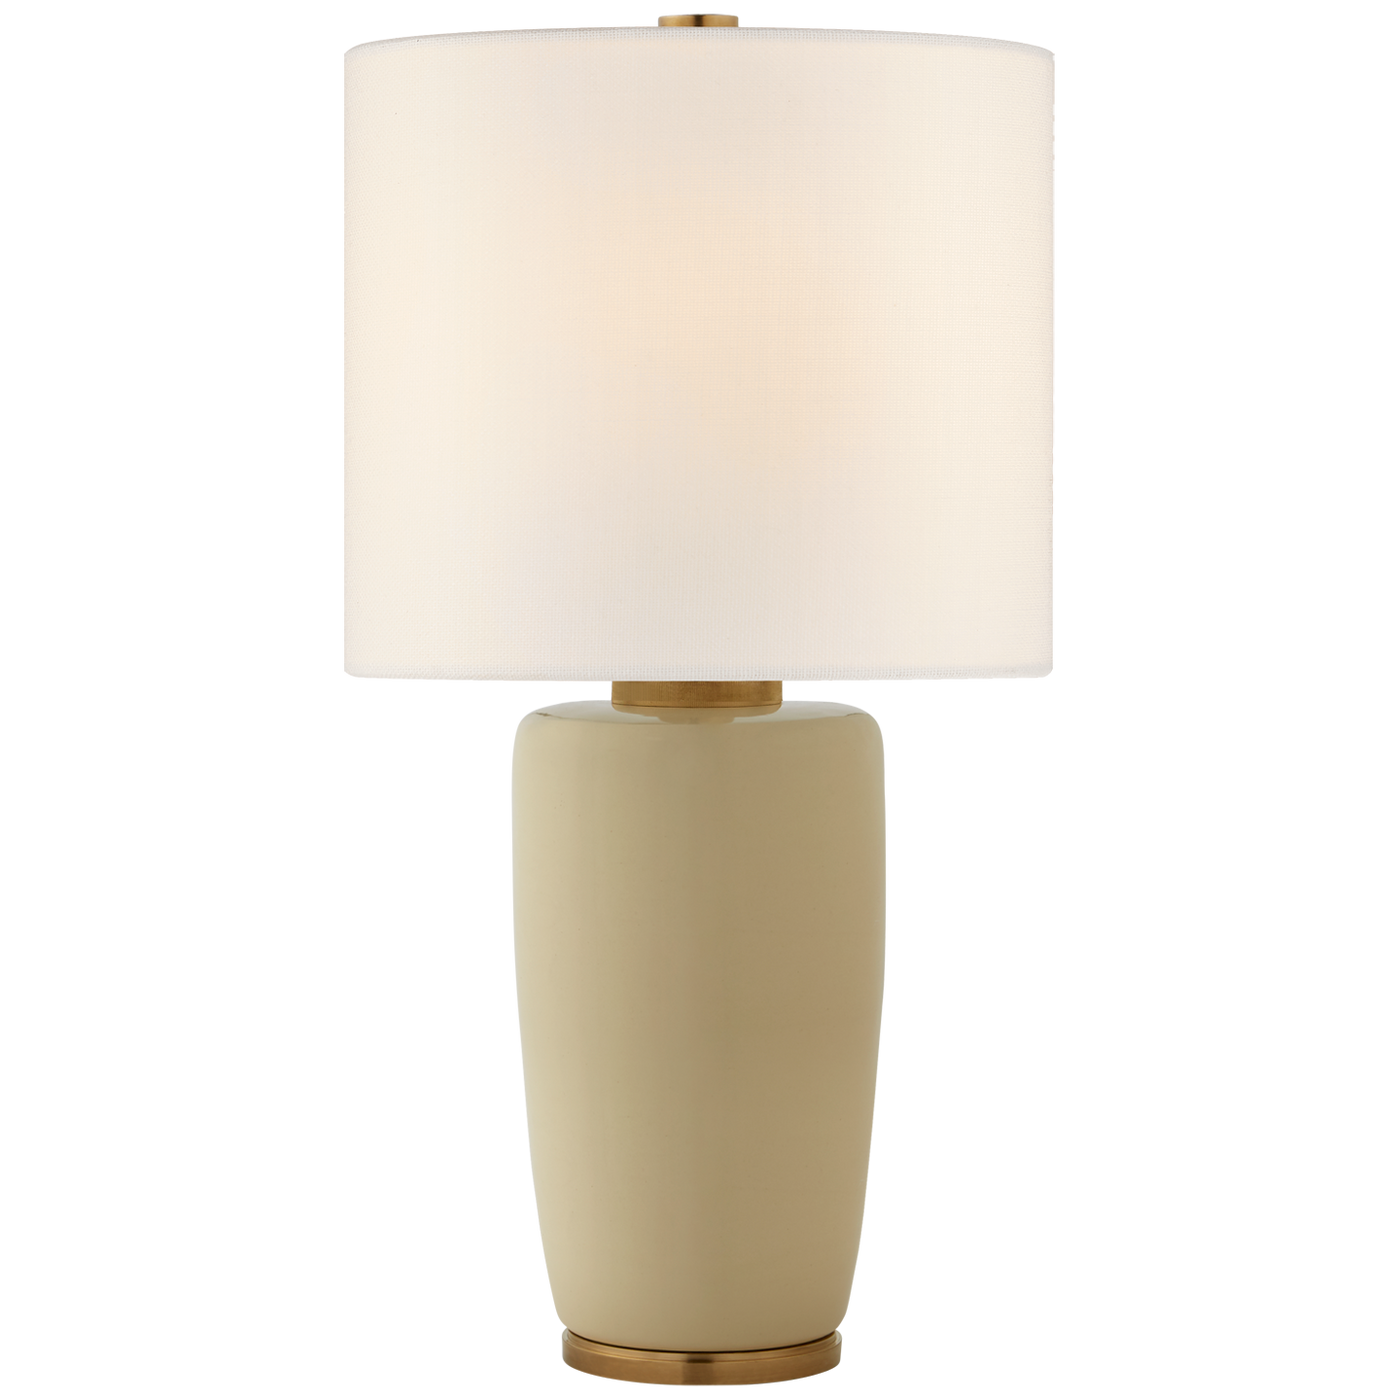 TABLE LAMP ROUND BASE LARGE (Available in 2 Finishes)